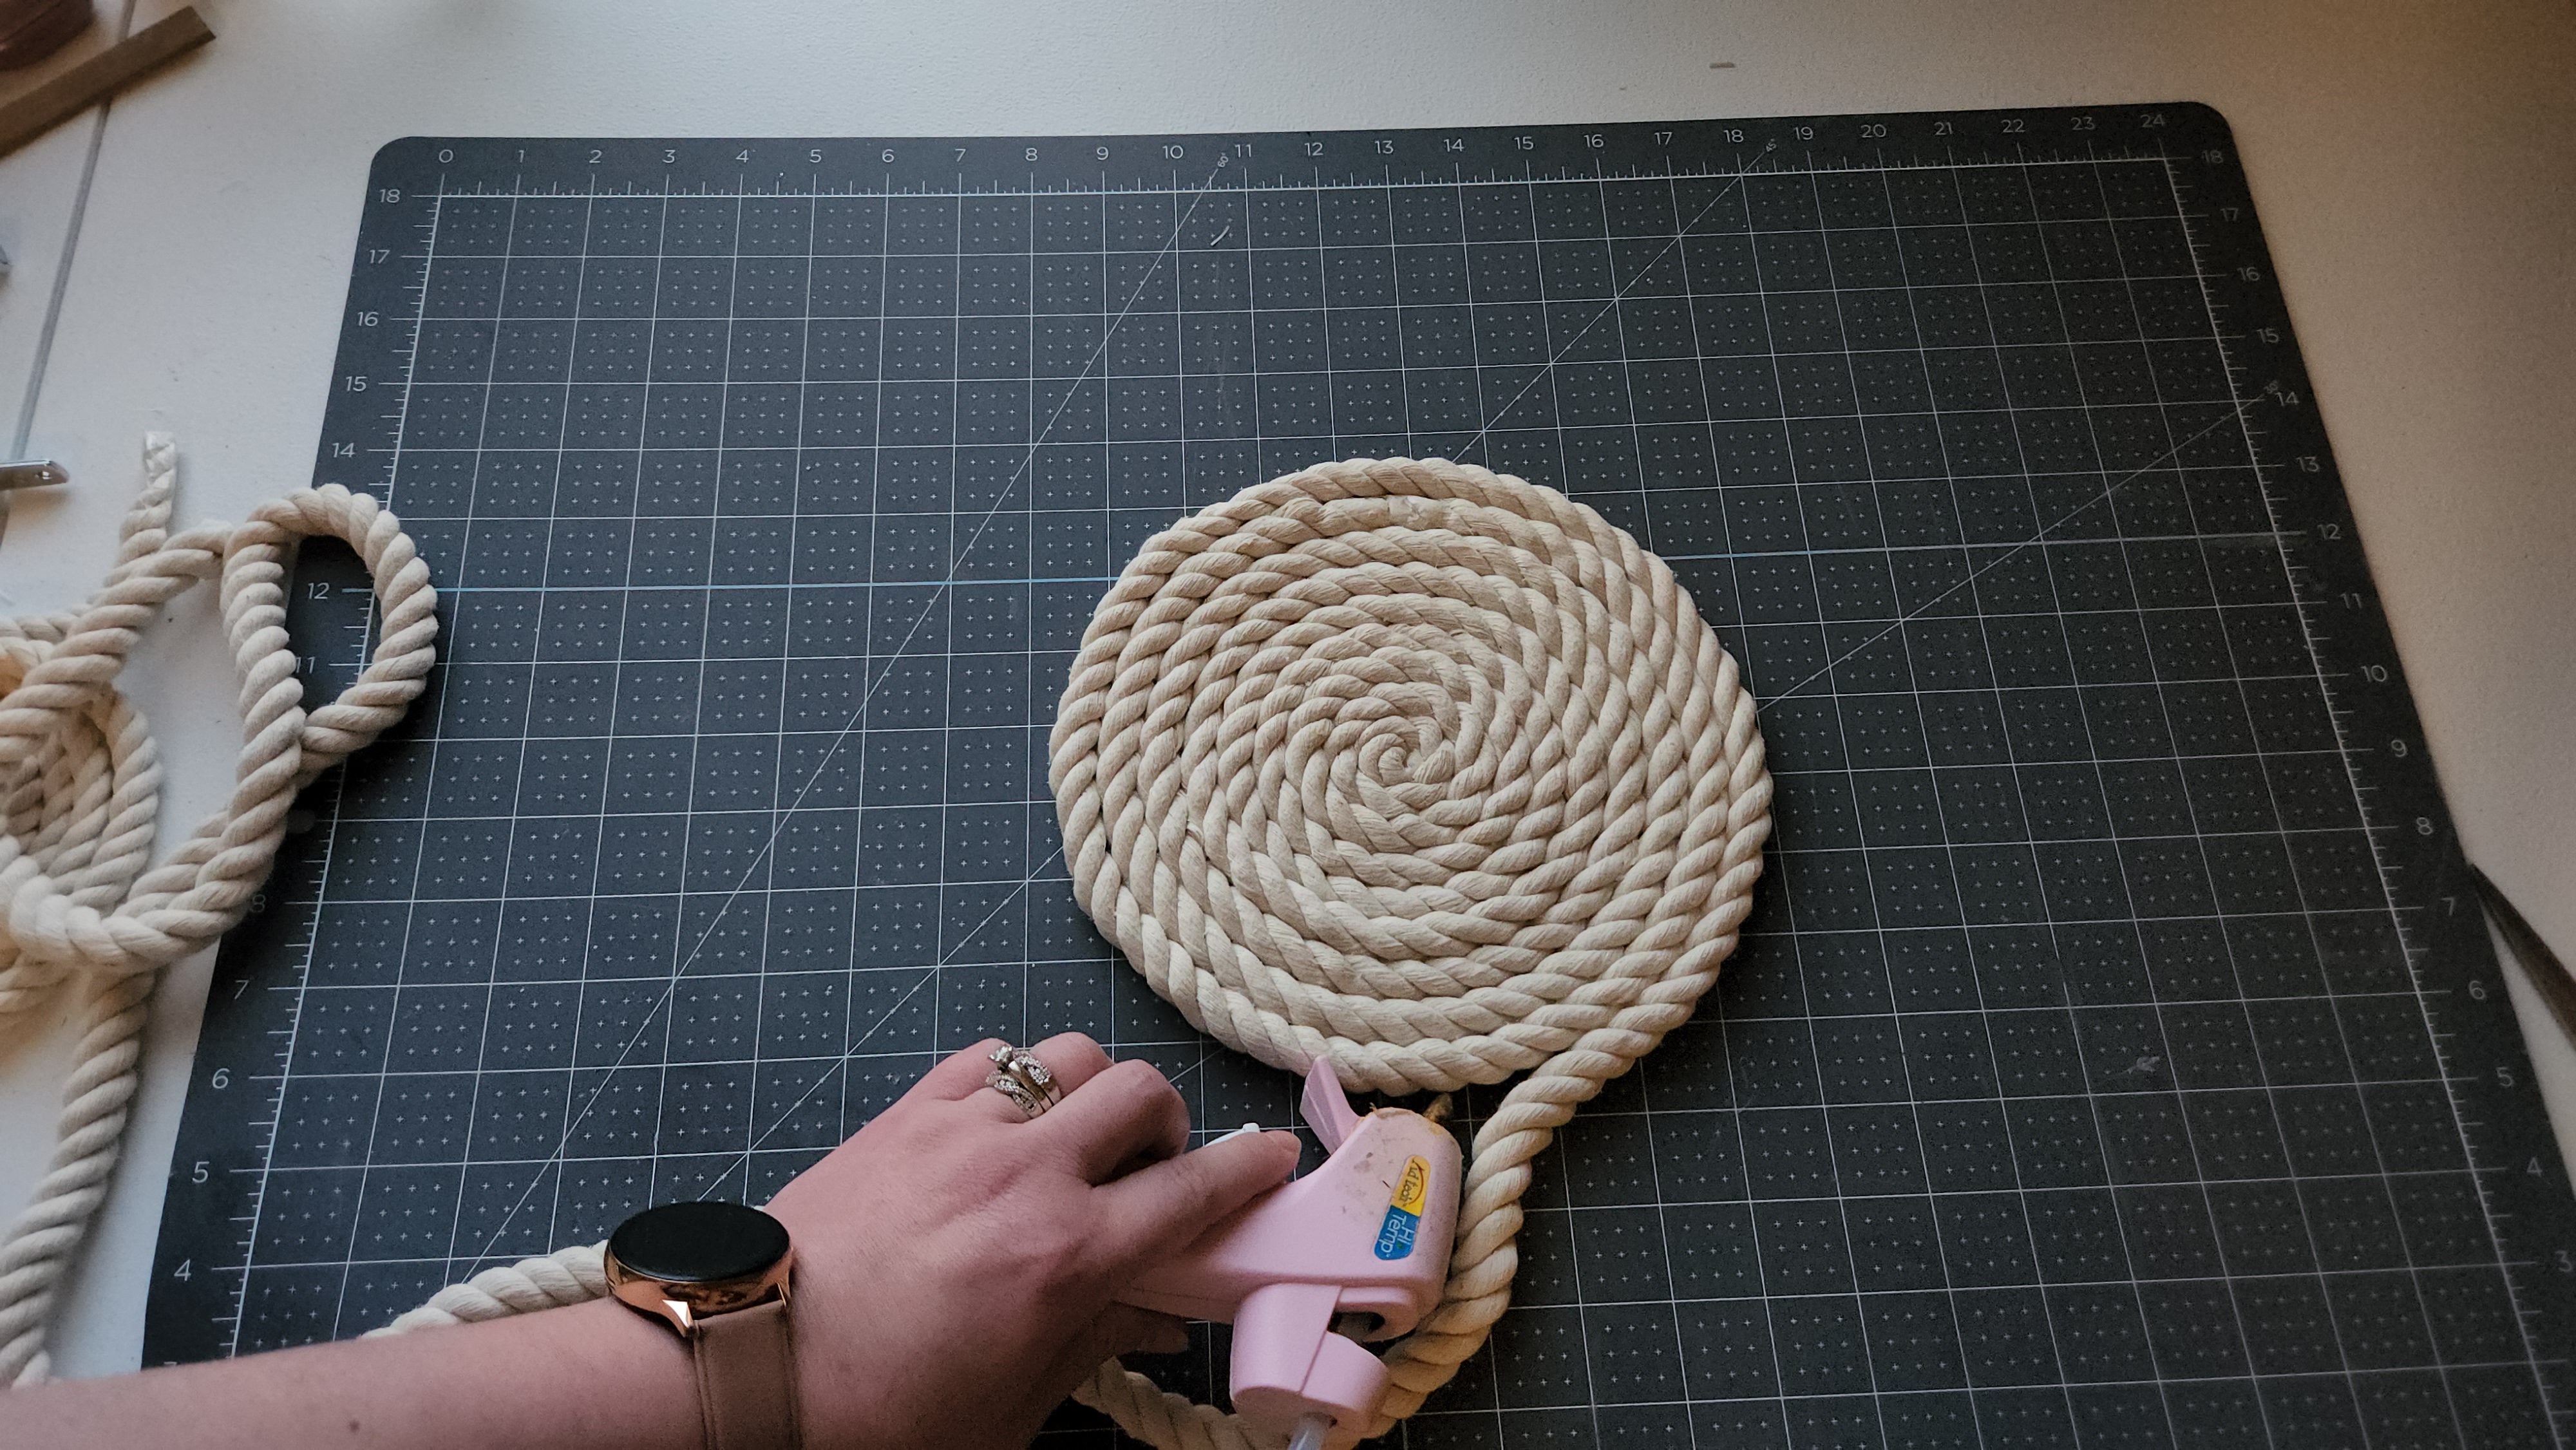 Adding hot glue to the end of the rope to add to the rope tray already forming.